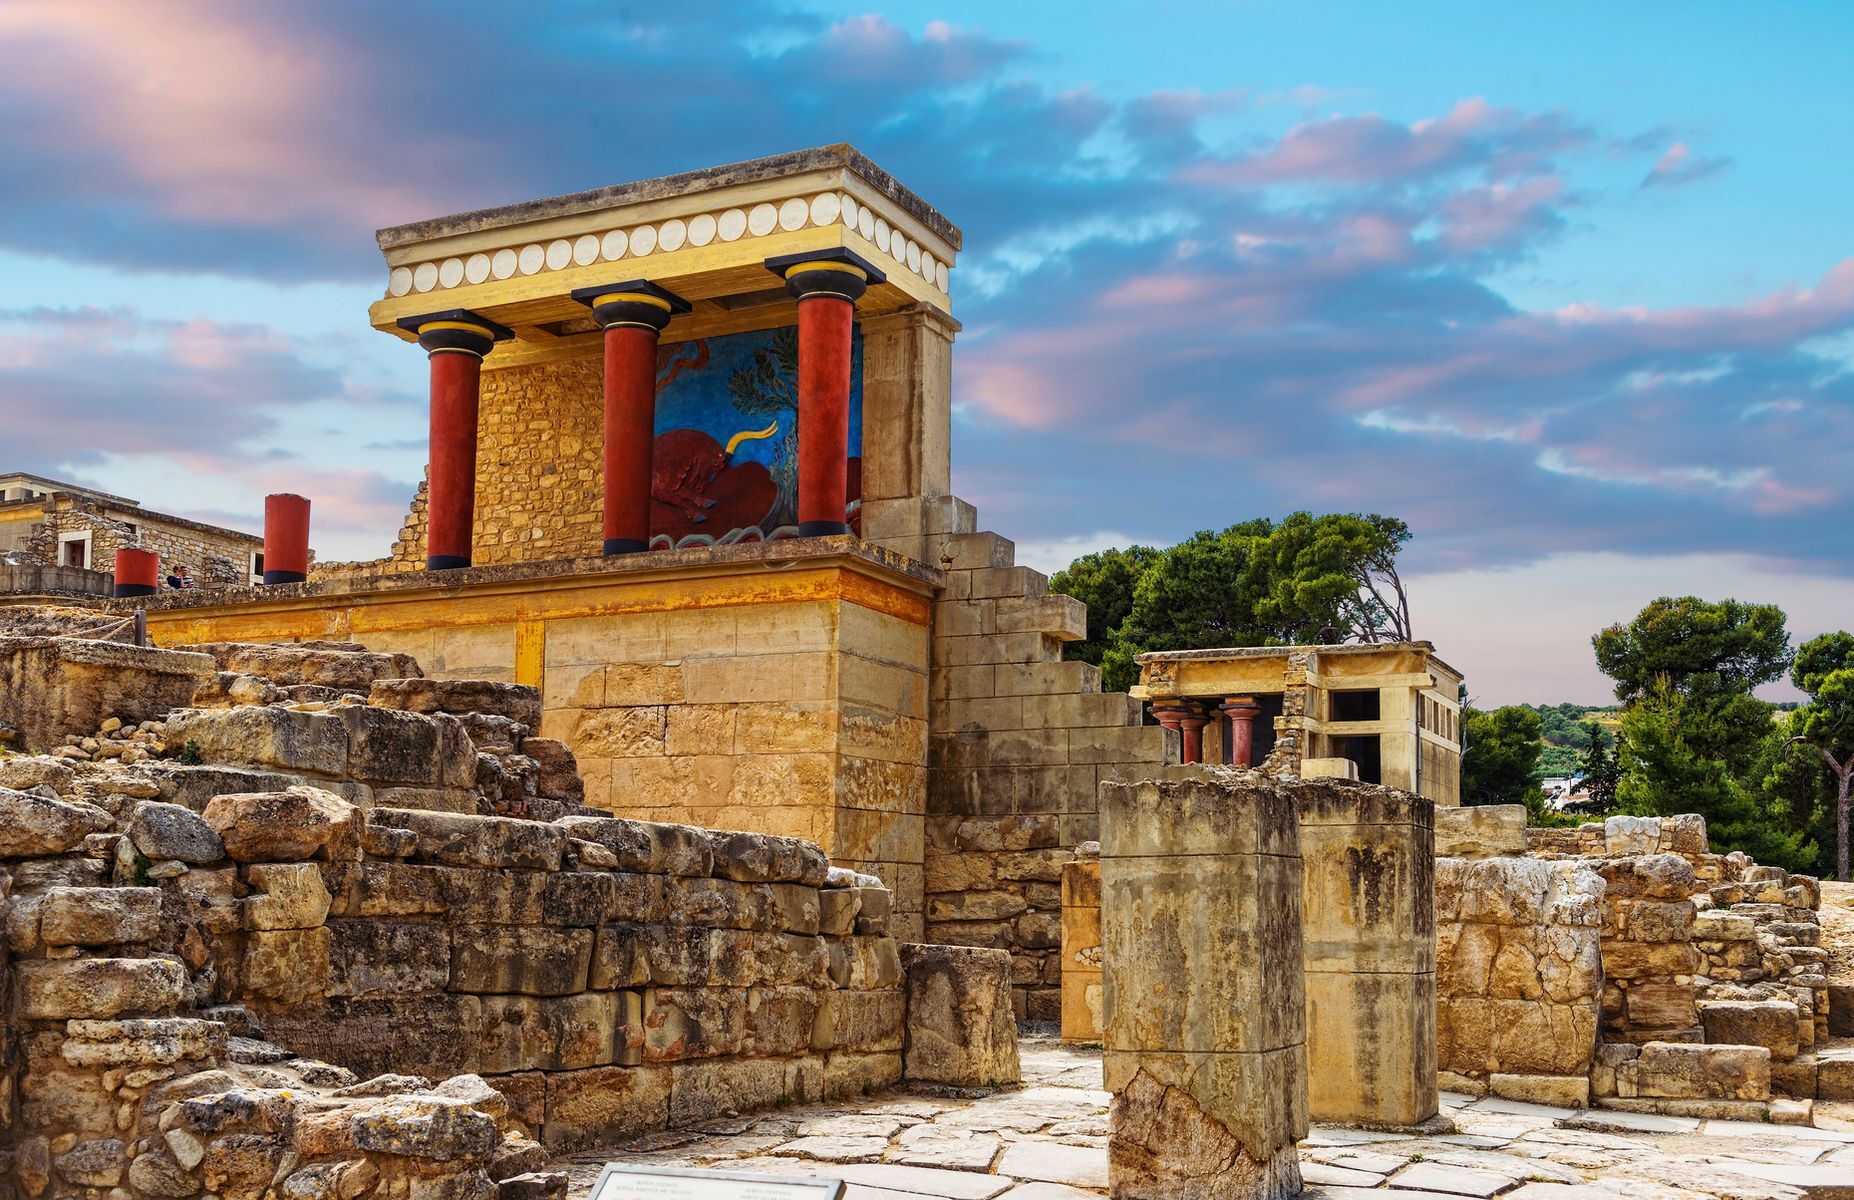 Nestled in northern Crete, the 3,000-year-old <a href="https://knossos-palace.gr/" rel="noreferrer noopener">Knossos Palace</a> provides a glimpse into the fascinating secrets of Minoan civilization. Travel back into ancient history with a stroll through the legendary <a href="https://www.posarellivillas.com/travel-tips/2021/bedtime-stories/minotaur-labyrinth-knossos" rel="noreferrer noopener">Minotaur’s Labyrinth</a> and a view of <a href="https://historyandarchaeologyonline.com/the-frescos-of-knossos/" rel="noreferrer noopener">colourful frescoes</a>. The palace is located less than 10 minutes by car from Heraklion, so enthusiasts can easily continue exploring historical relics at the city’s <a href="https://www.heraklionmuseum.gr/en/the-museum/" rel="noreferrer noopener">archaeological museum</a>.